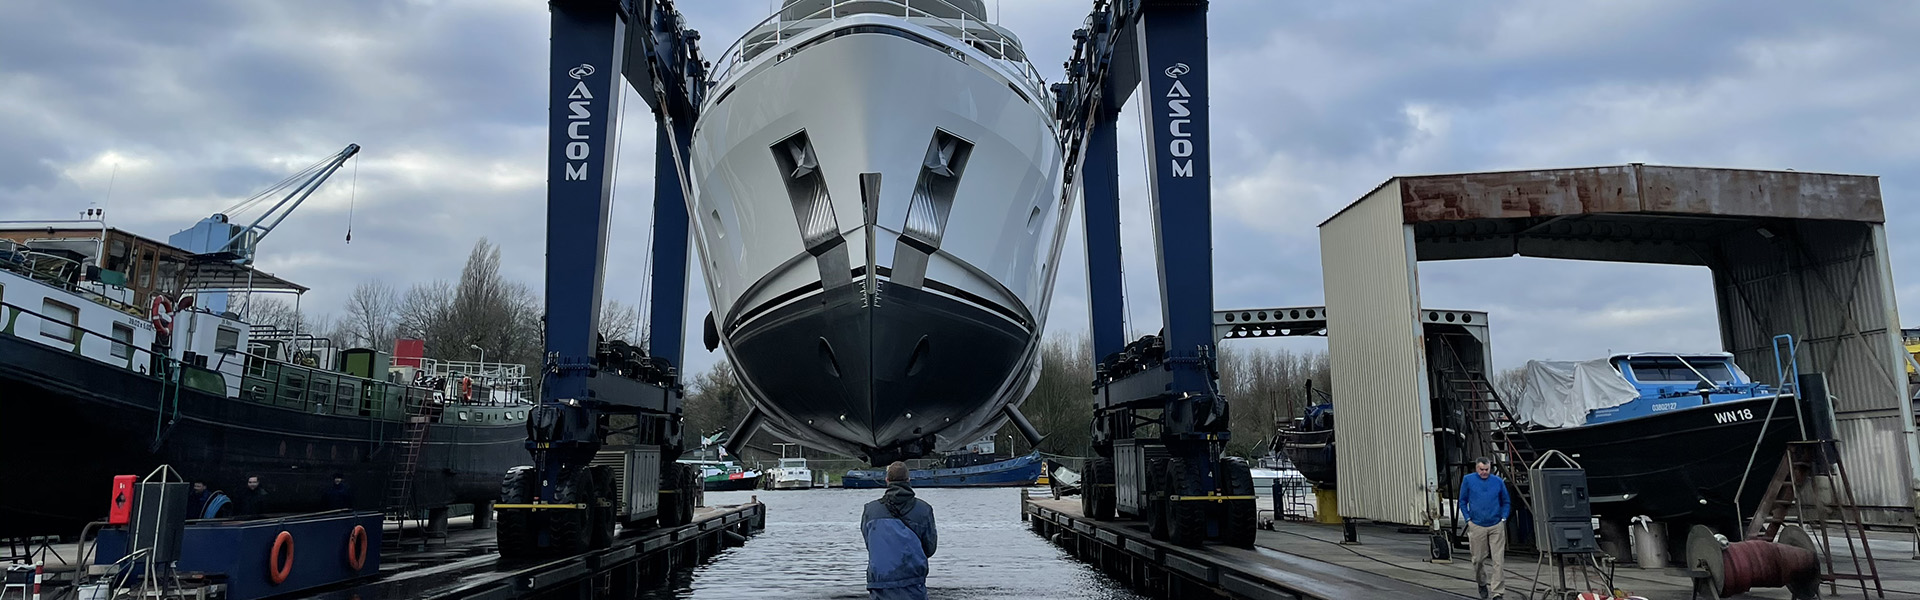 Lifting a yacht for service and repair